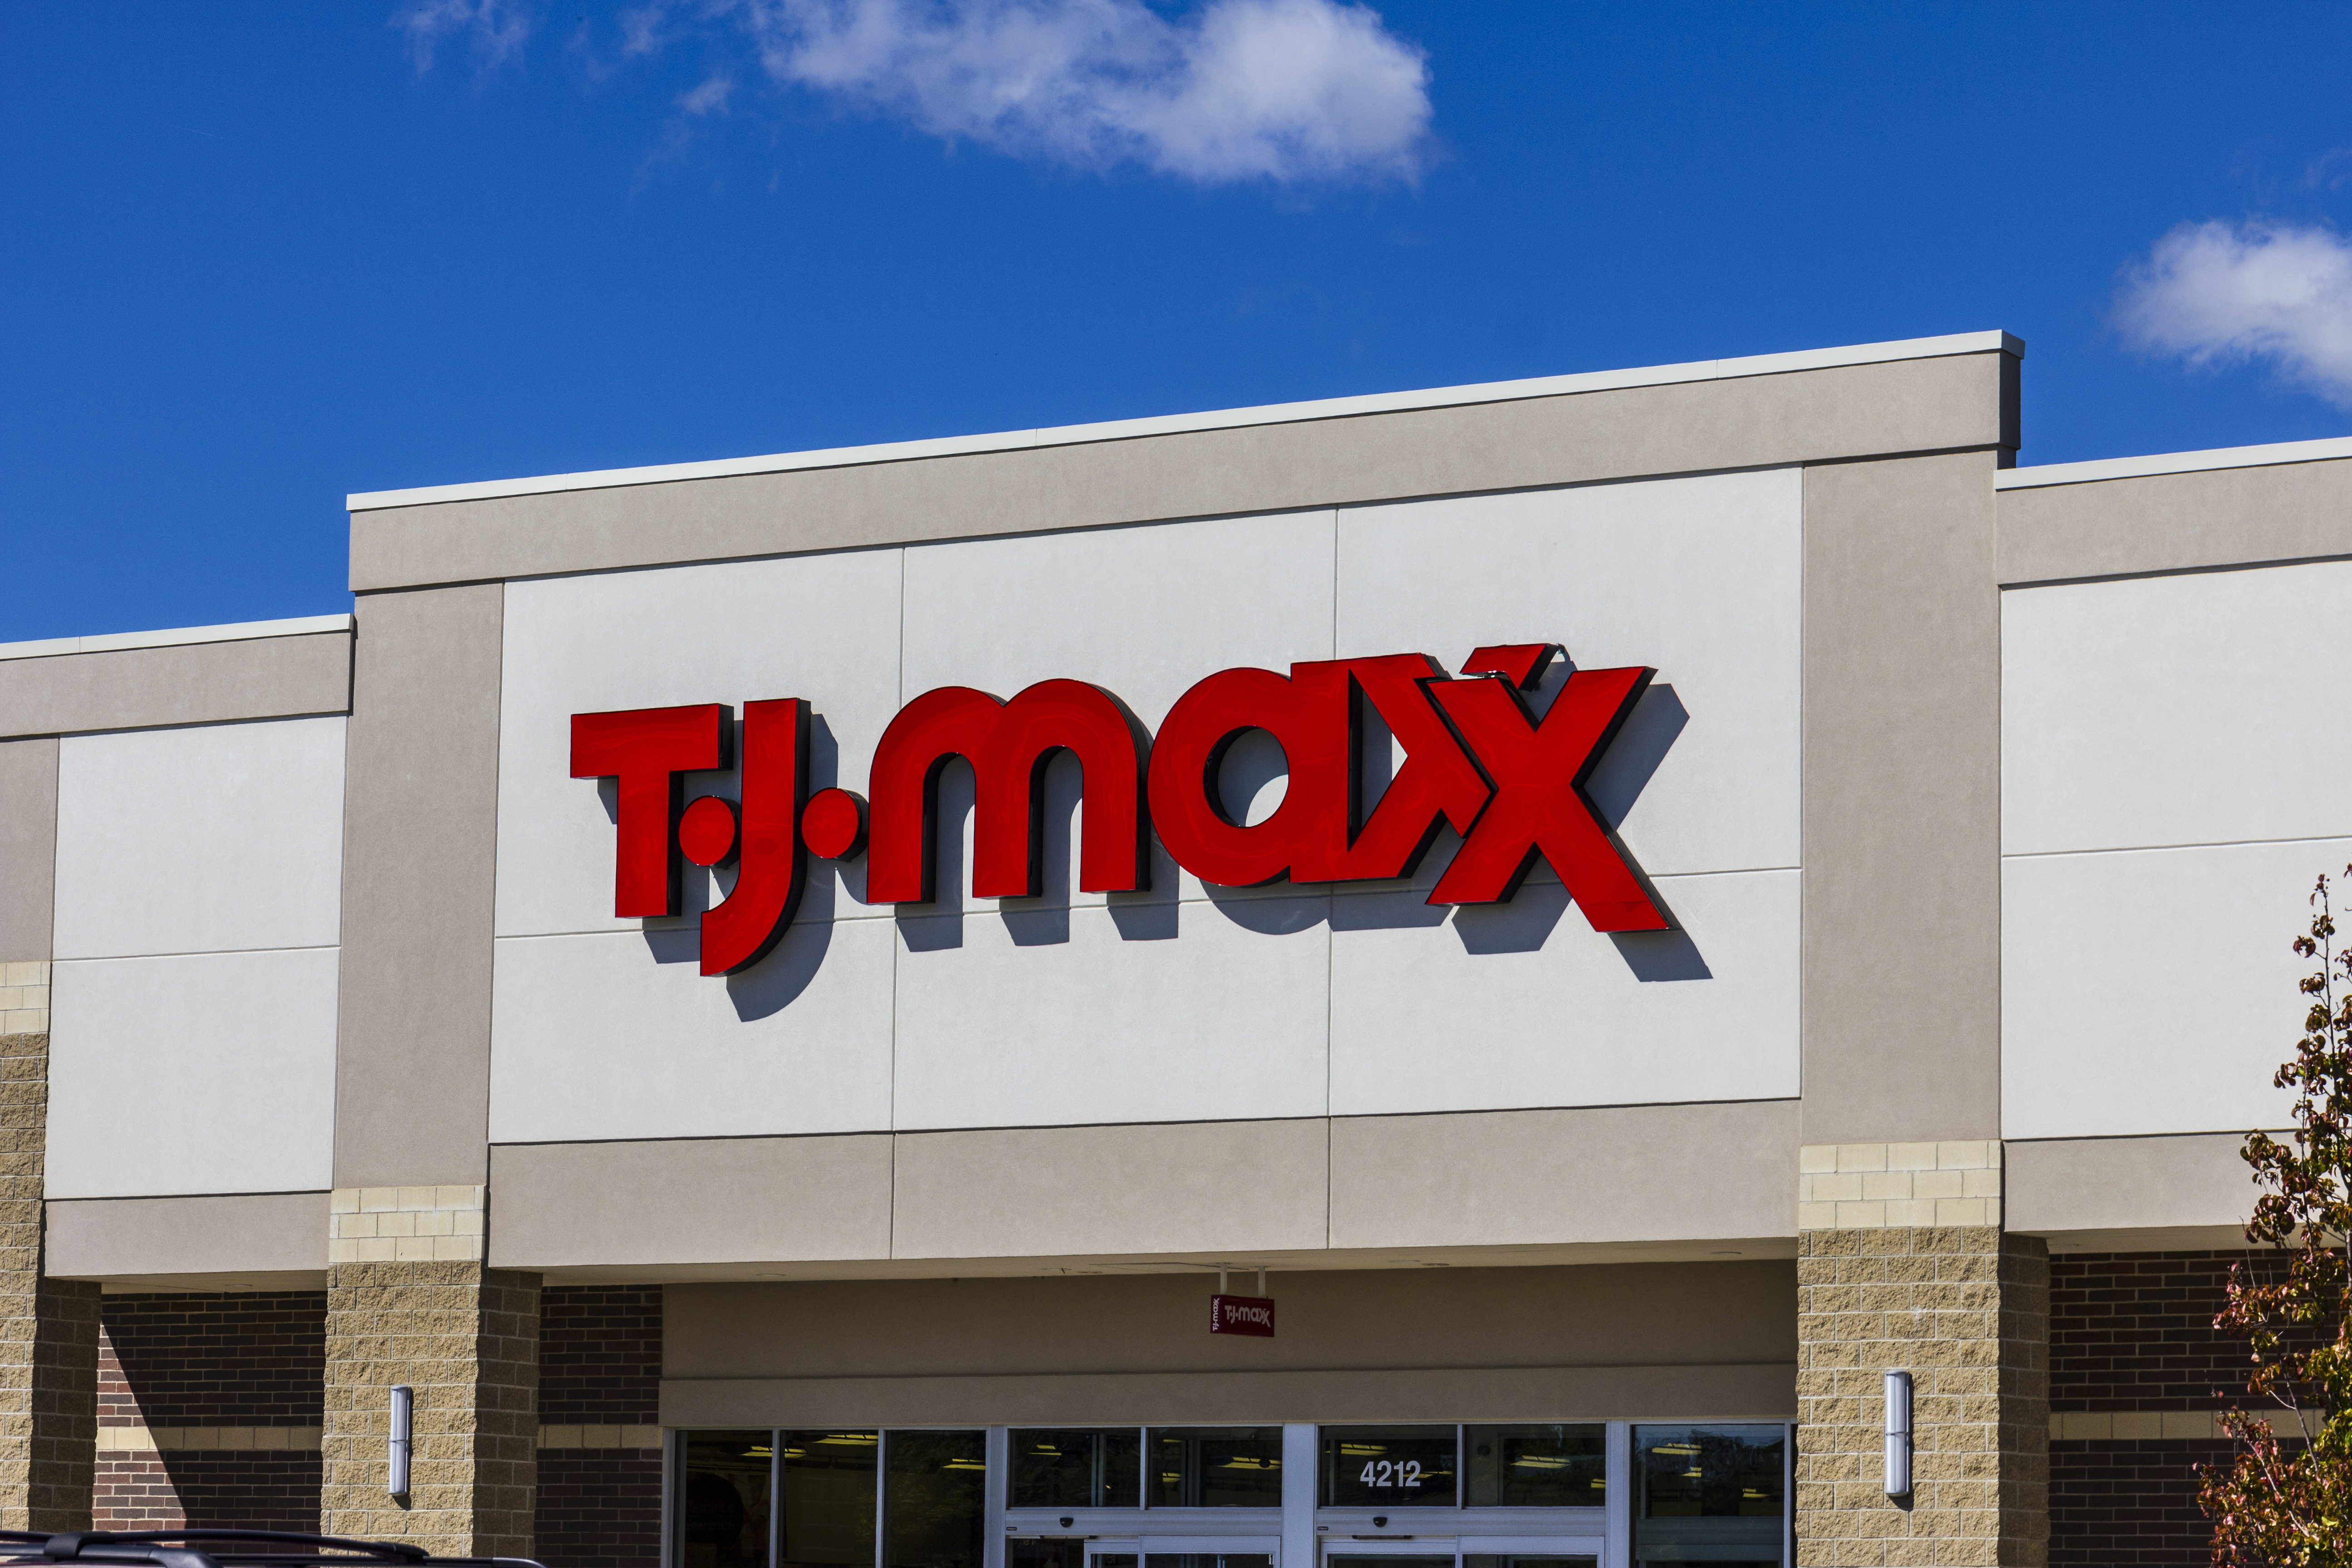 T.J.Maxx Secretly Launched Online Shopping Yesterday!